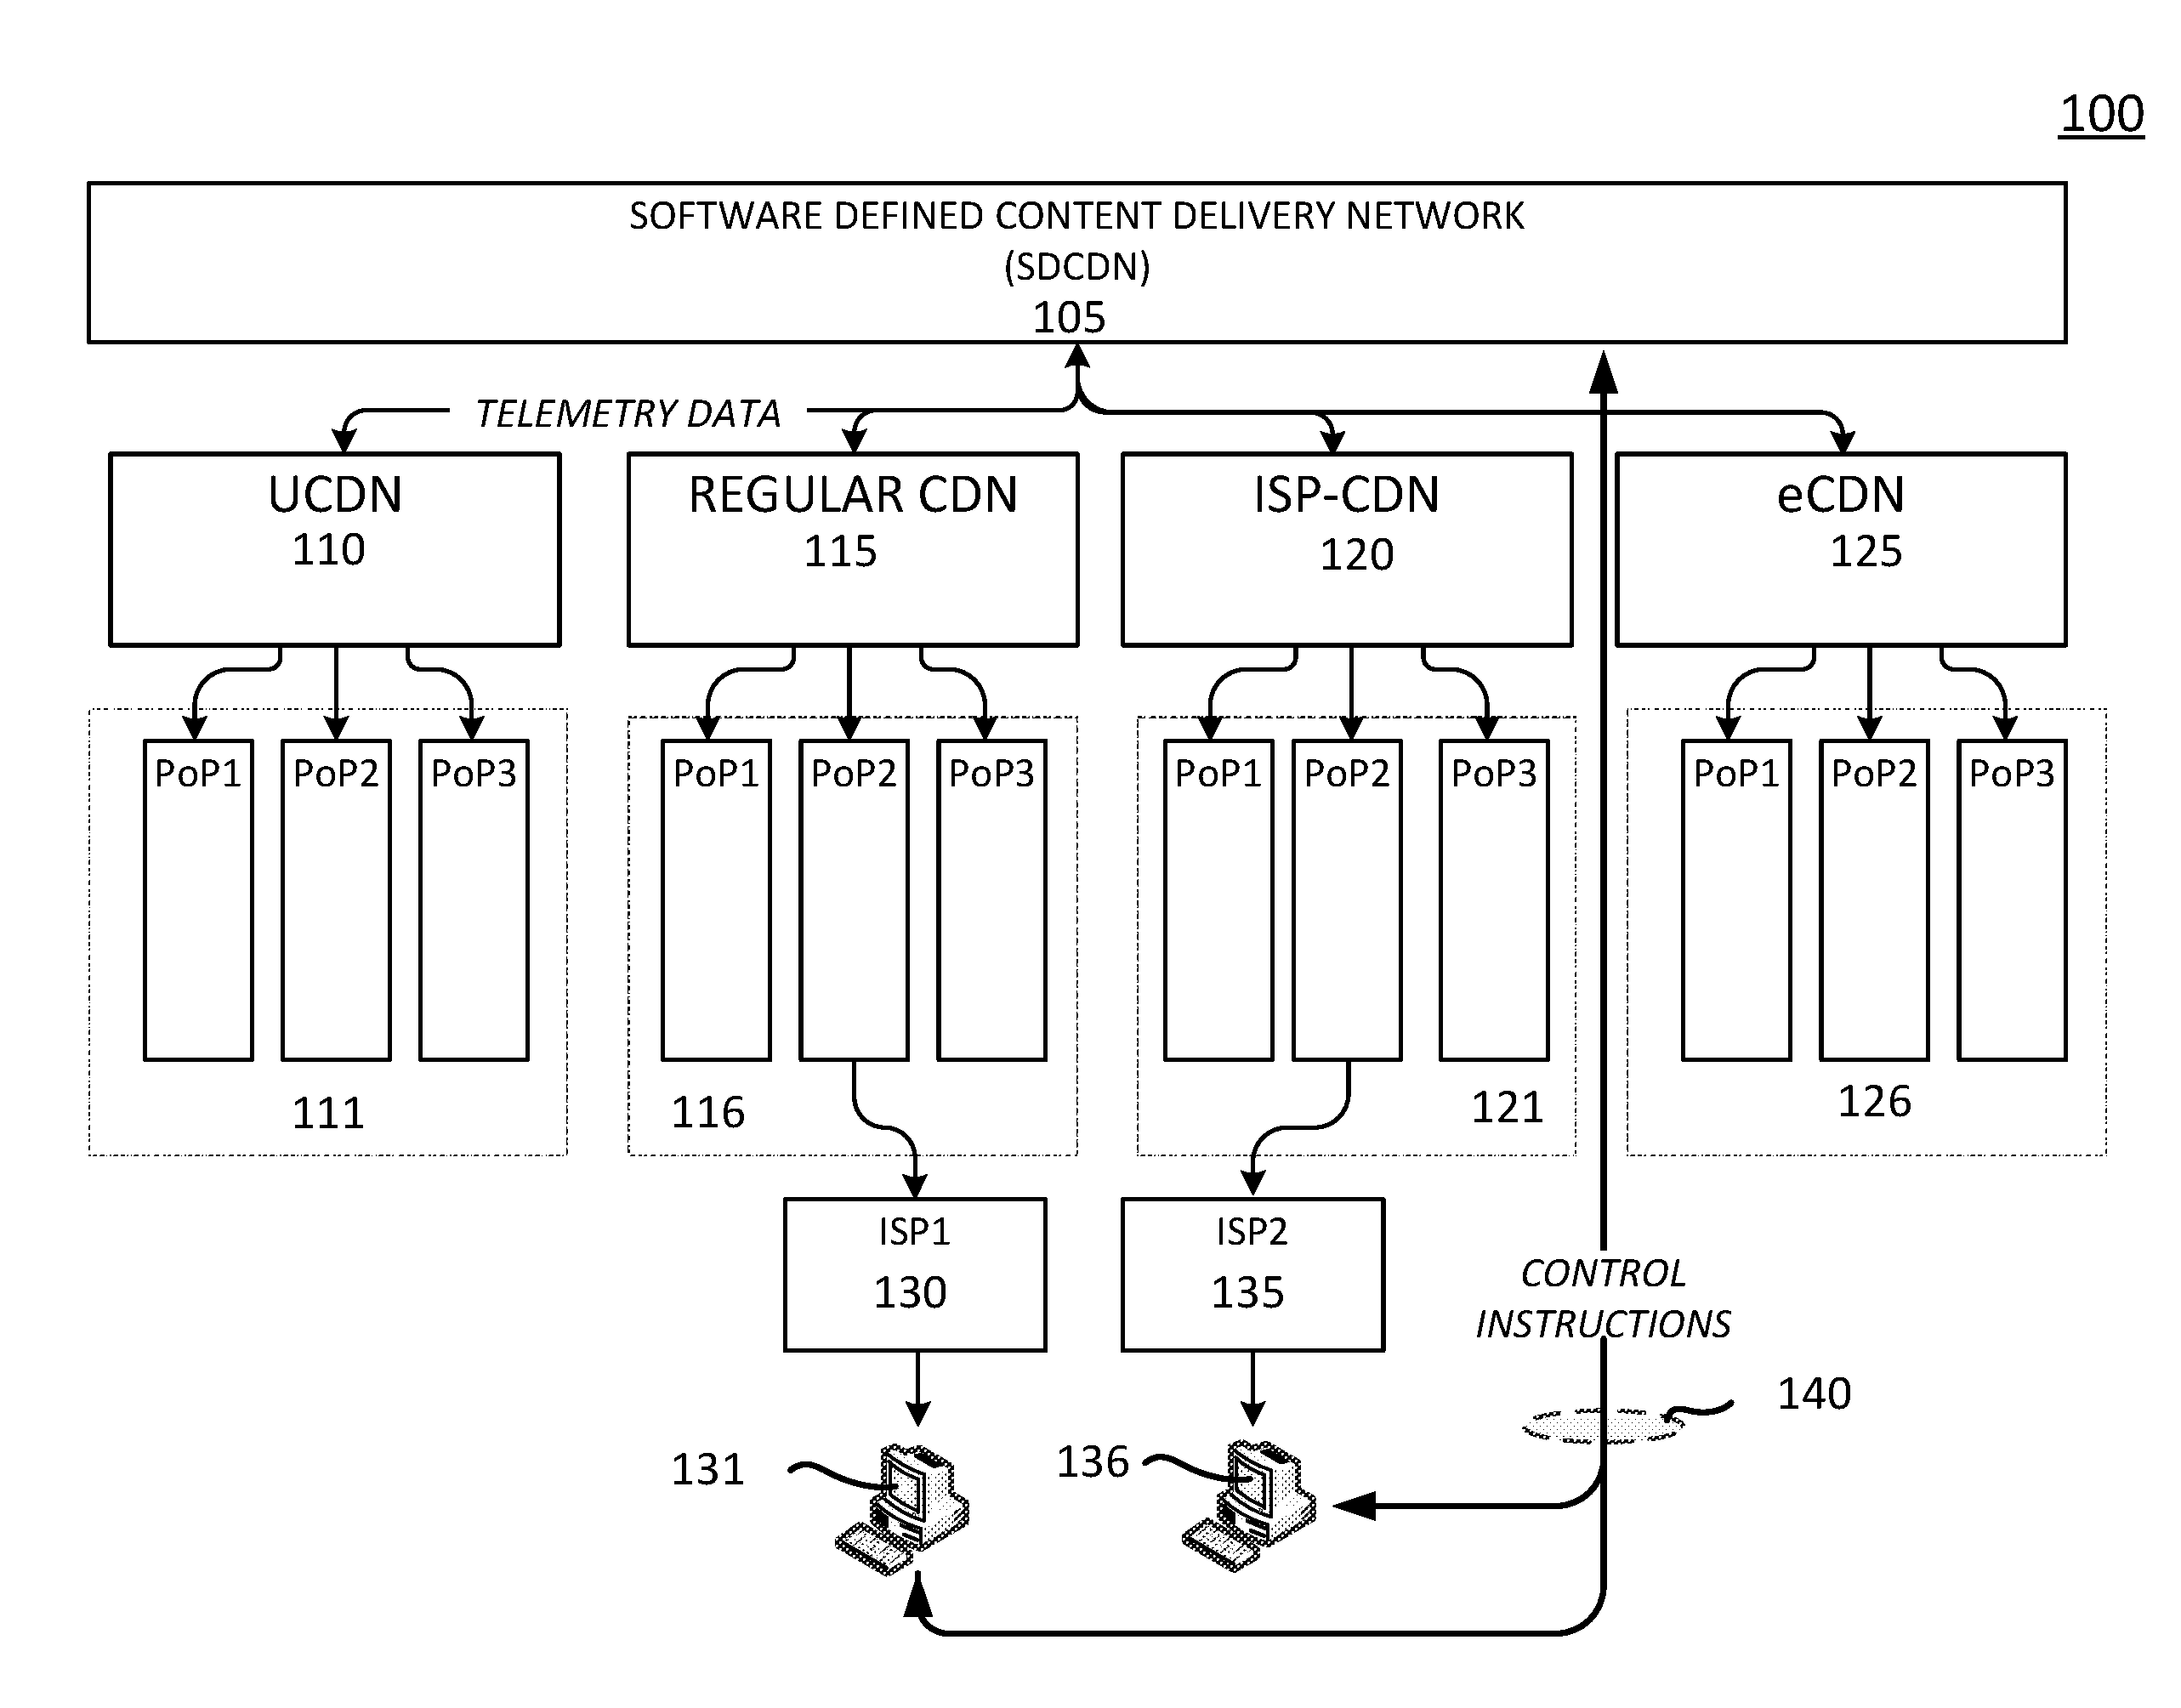 Techniques for managing telemetry data for content delivery and/or data transfer networks